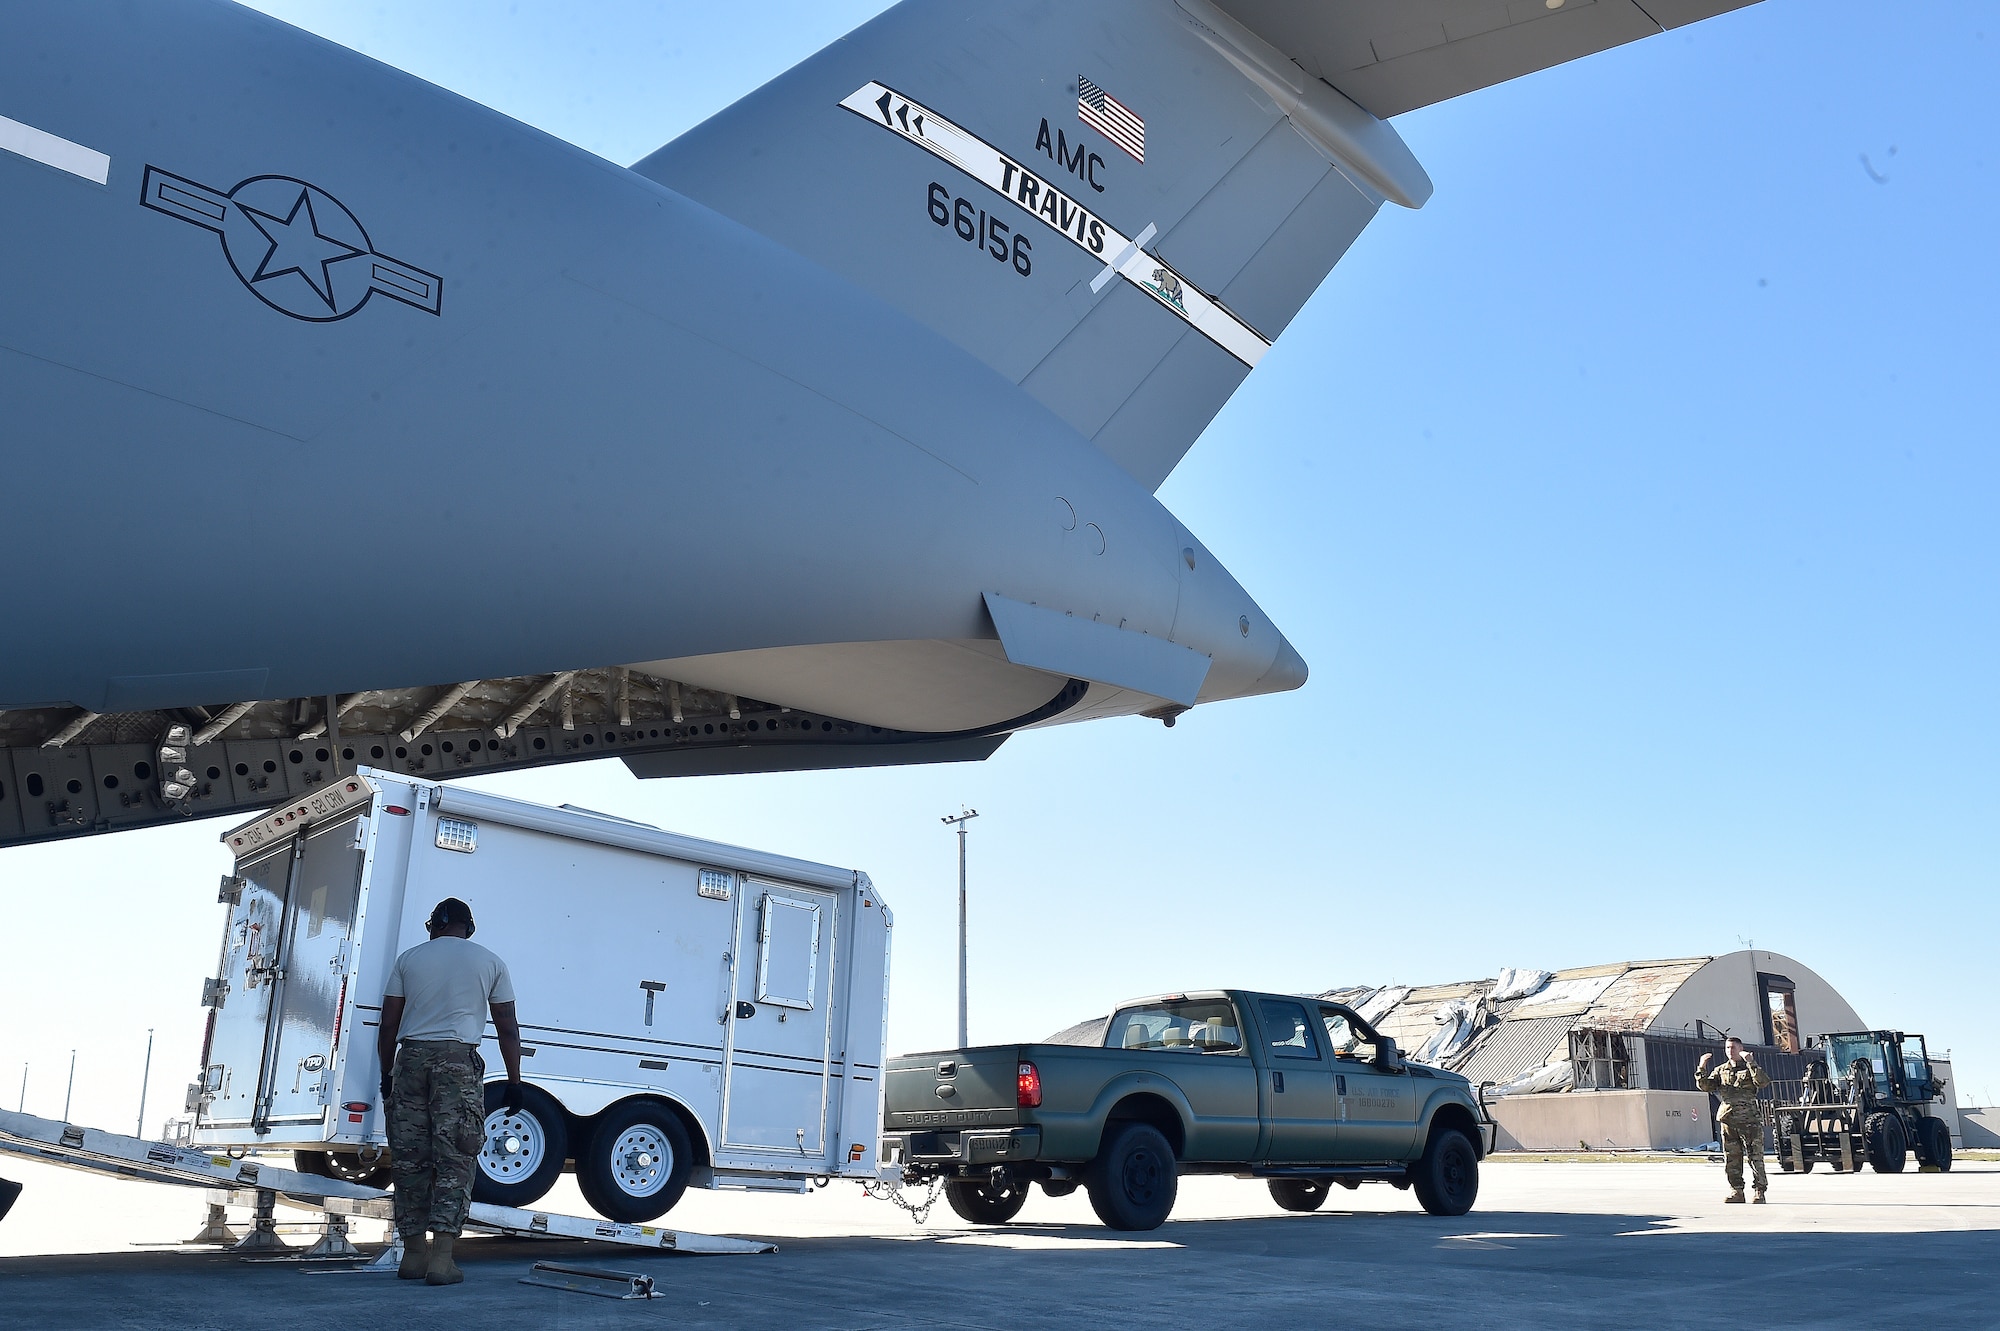 821st Contingency Response Group Airmen offload their mobile command and control trailer from a Travis Air Force Base C-17 Globemaster III, at Tyndall Air Force Base, Florida, Oct. 12, 2018. The mobility Airmen of this contingency response team deployed to assess damage and establish conditions for the re-initiation of airflow, bringing much needed equipment, supplies and personnel for the rebuilding of the base in the aftermath of Hurricane Michael. AMC equipment and personnel stand by across the nation to provide even more support upon request. (U.S. Air Force photo by Tech. Sgt. Liliana Moreno)